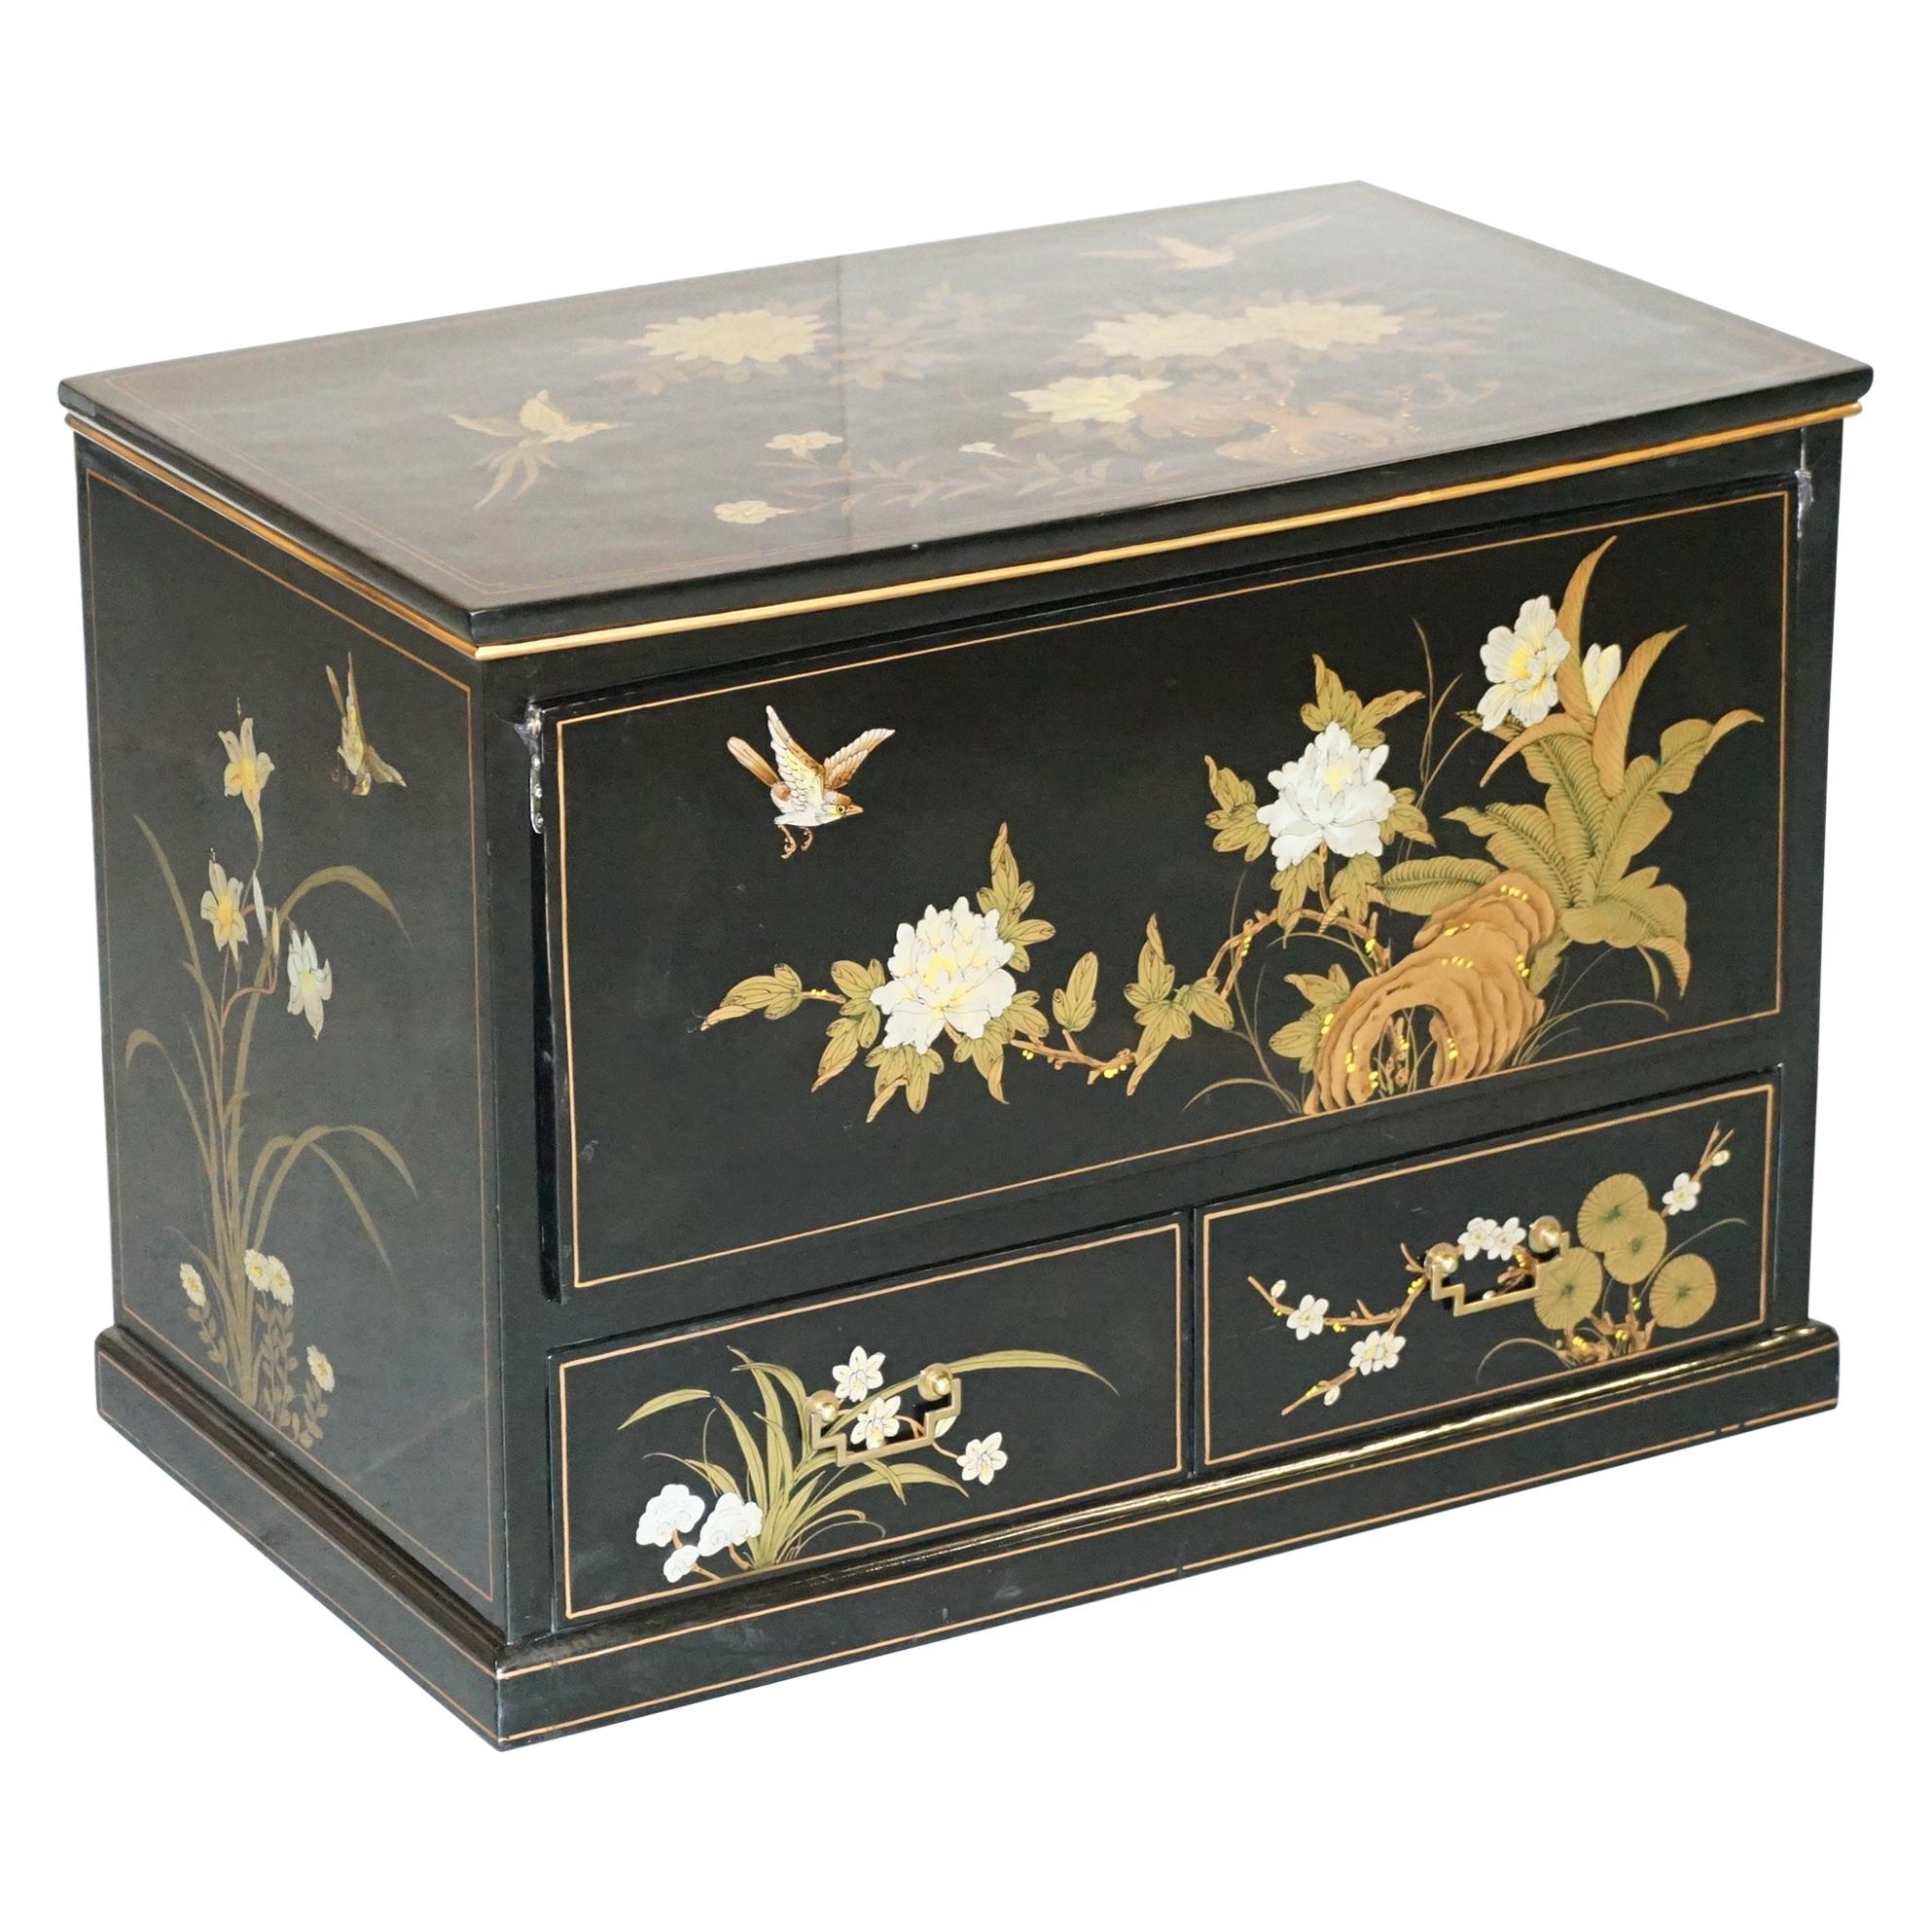 Vintage Chinese Chinoiserie TV Media Stand Black Lacquered Paint Bird & Flowers